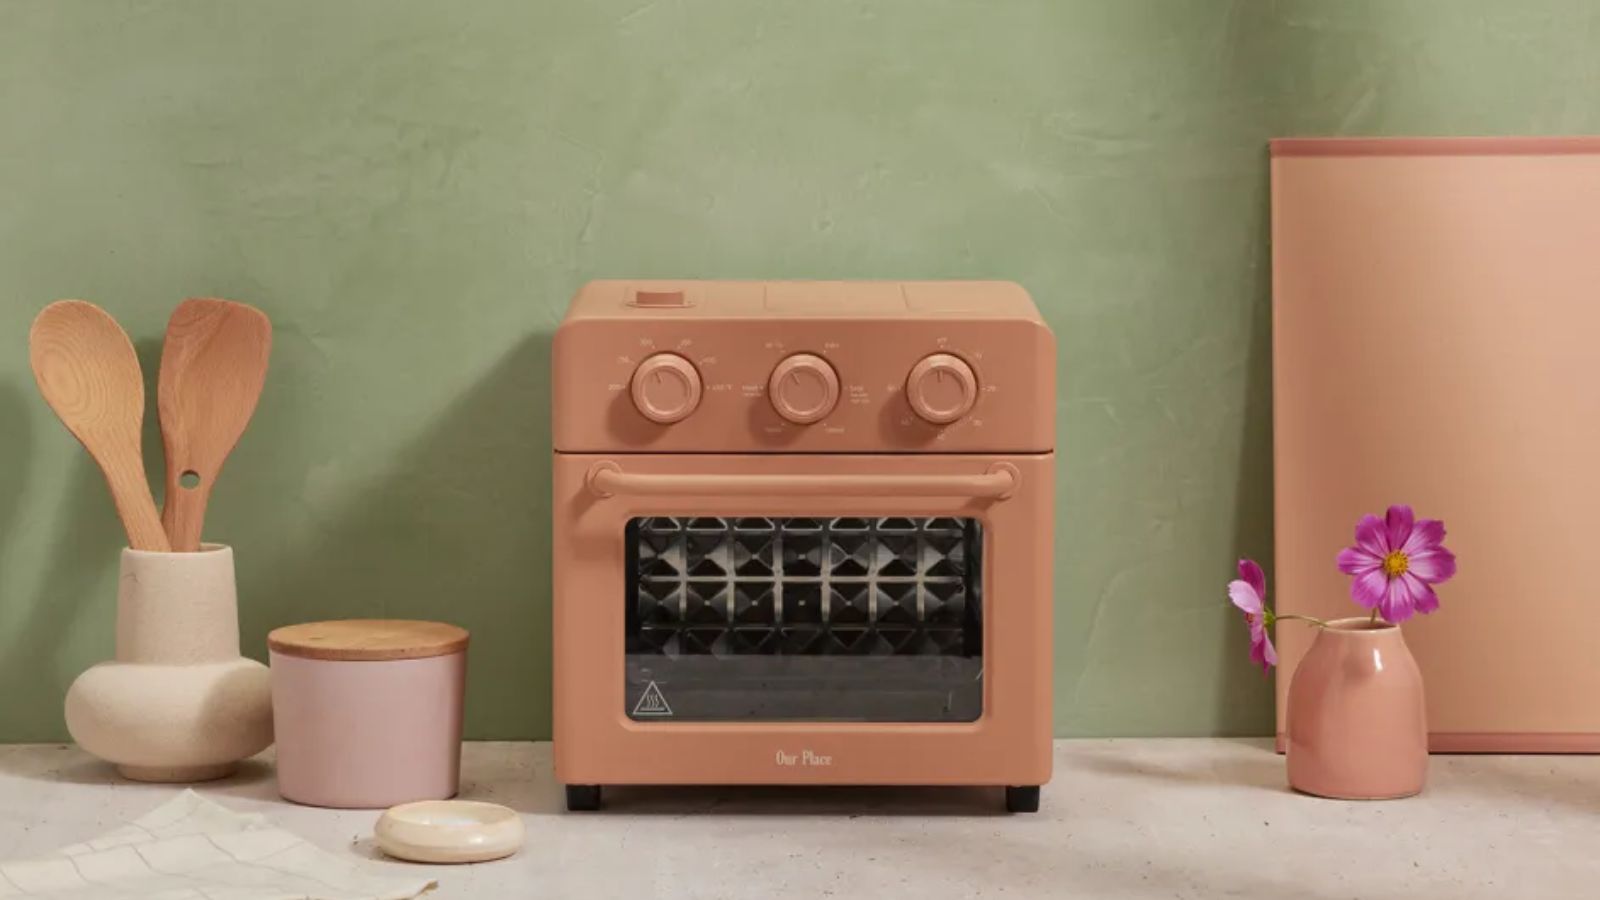 Our Place Wonder Oven 6-in-1 Air Fryer & Toaster in Spice